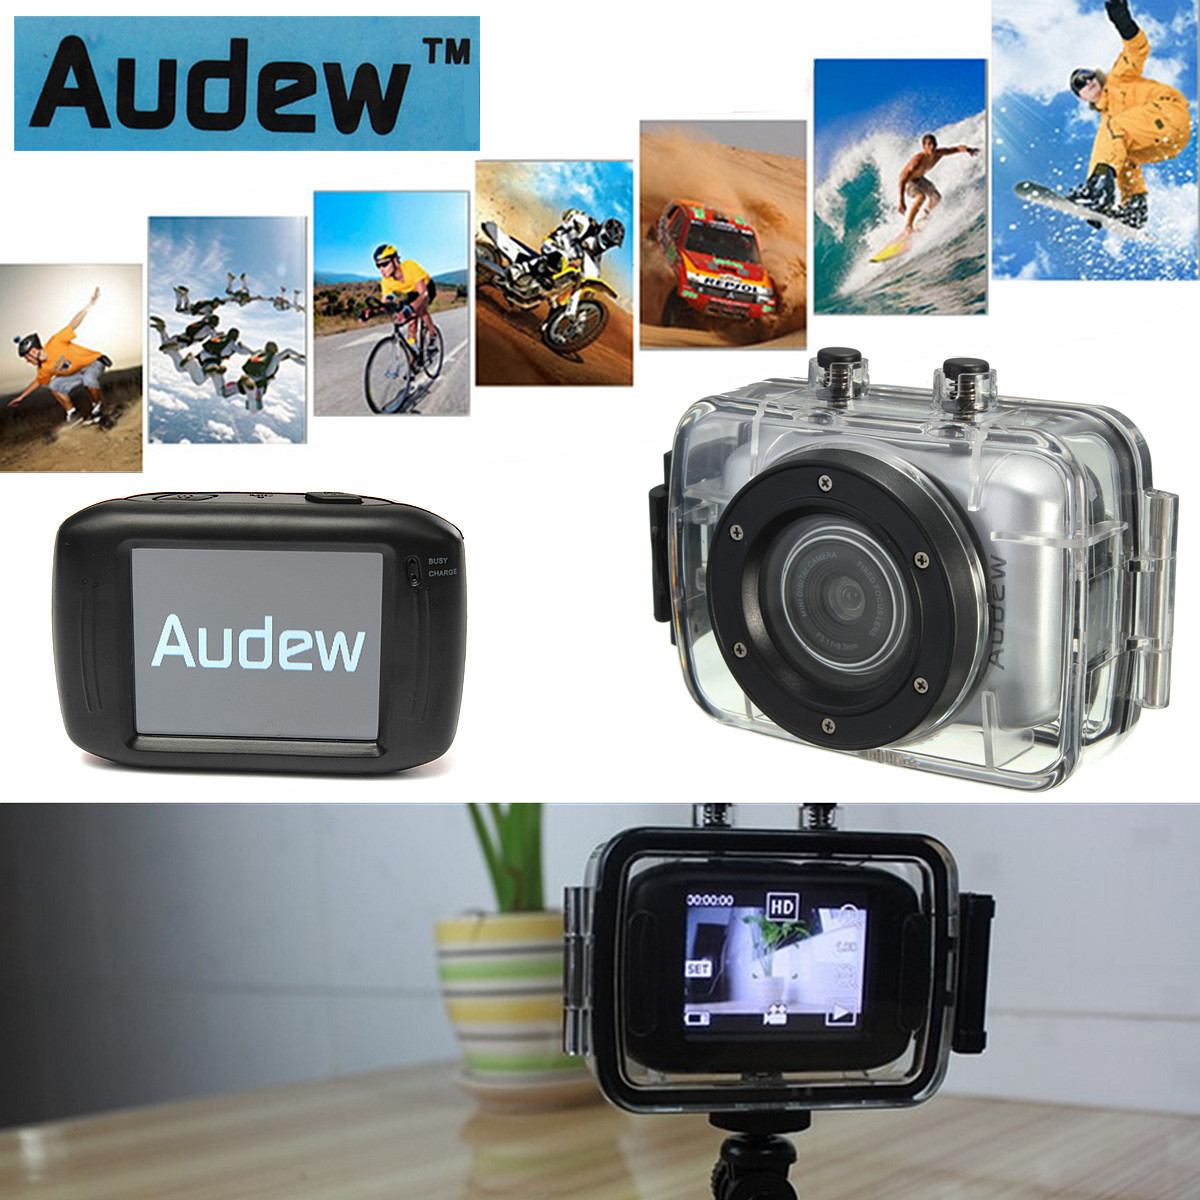 2-Inch-720P-HD-Touch-Screen-Portable-Waterproof-Mini-Action-Outdoor-Sport-Camera-DV-Camcorder-1336787-4